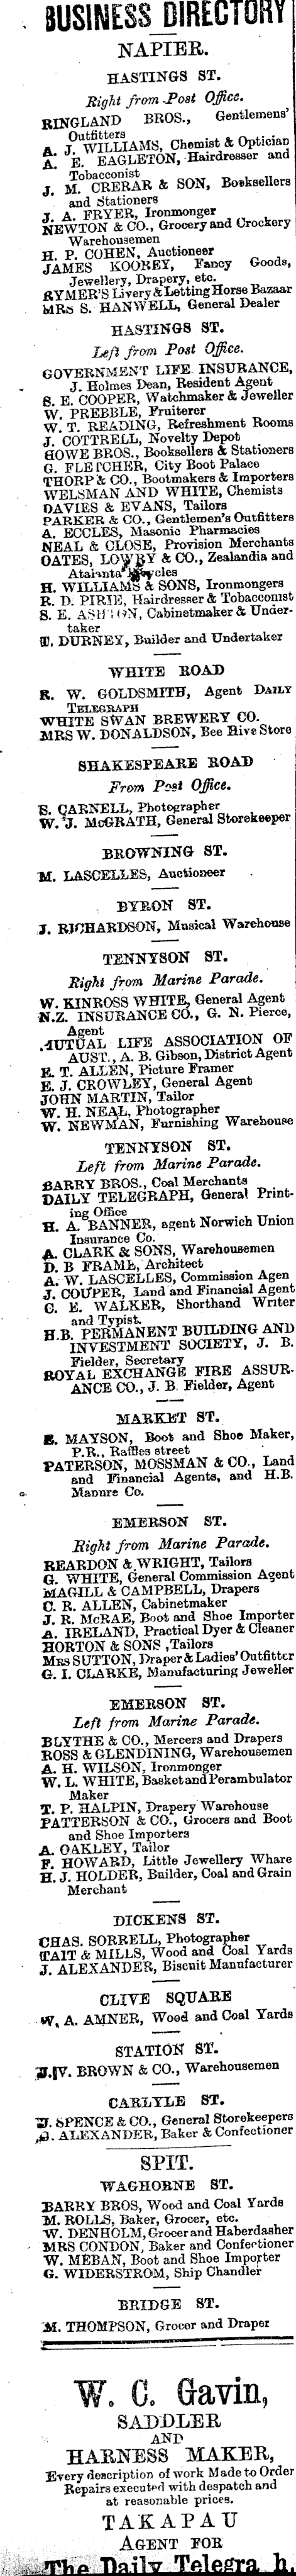 Papers Past Newspapers Daily Telegraph 9 October 1900 Page 2 Advertisements Column 1